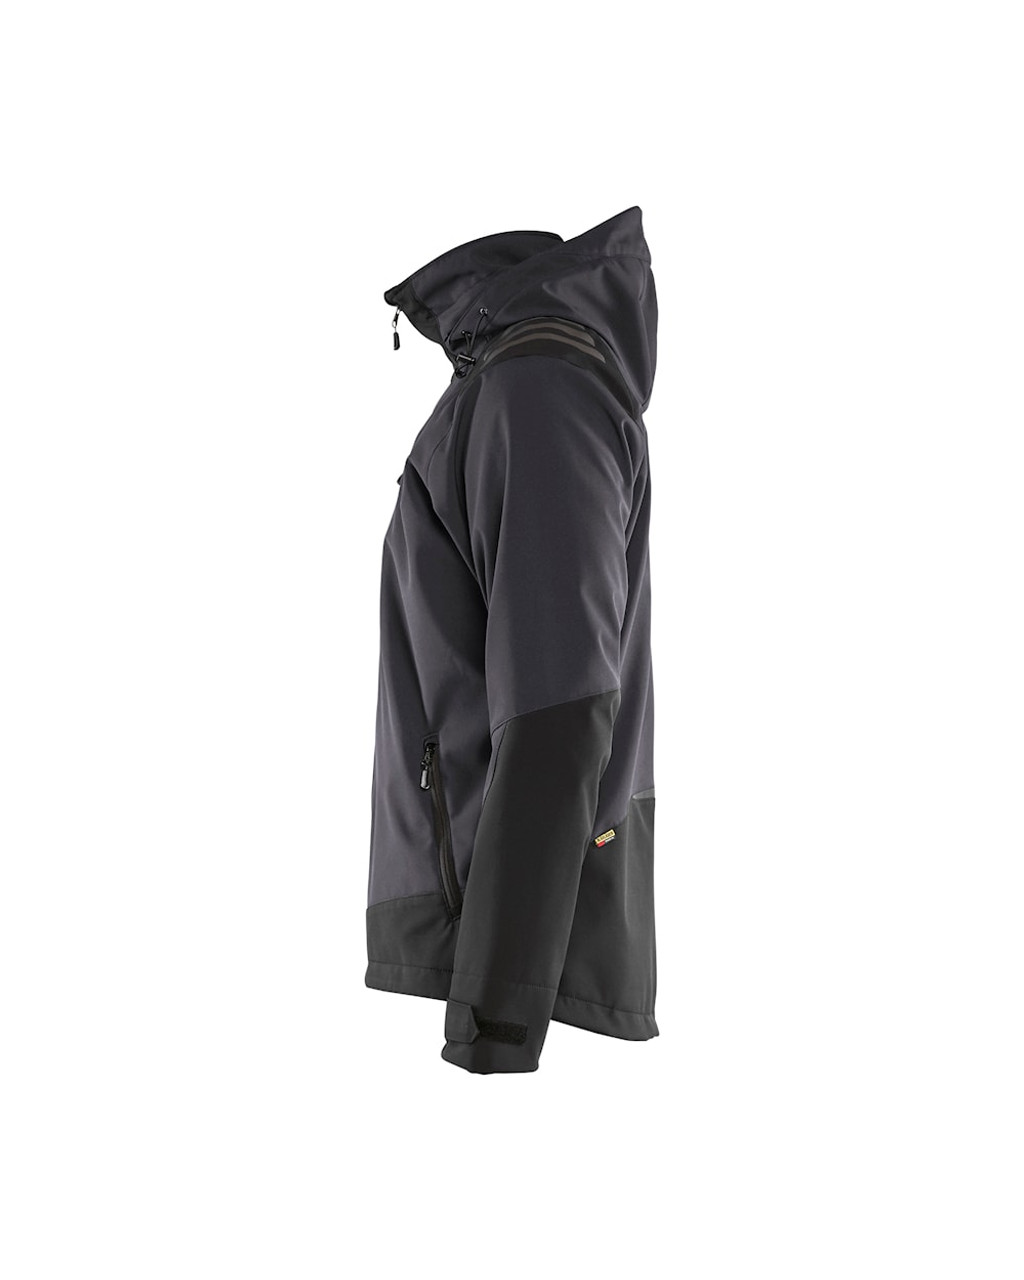 Buy online in Australia and New Zealand a Mens Dark Grey Jacket  for Carpenters that are comfortable and durable.